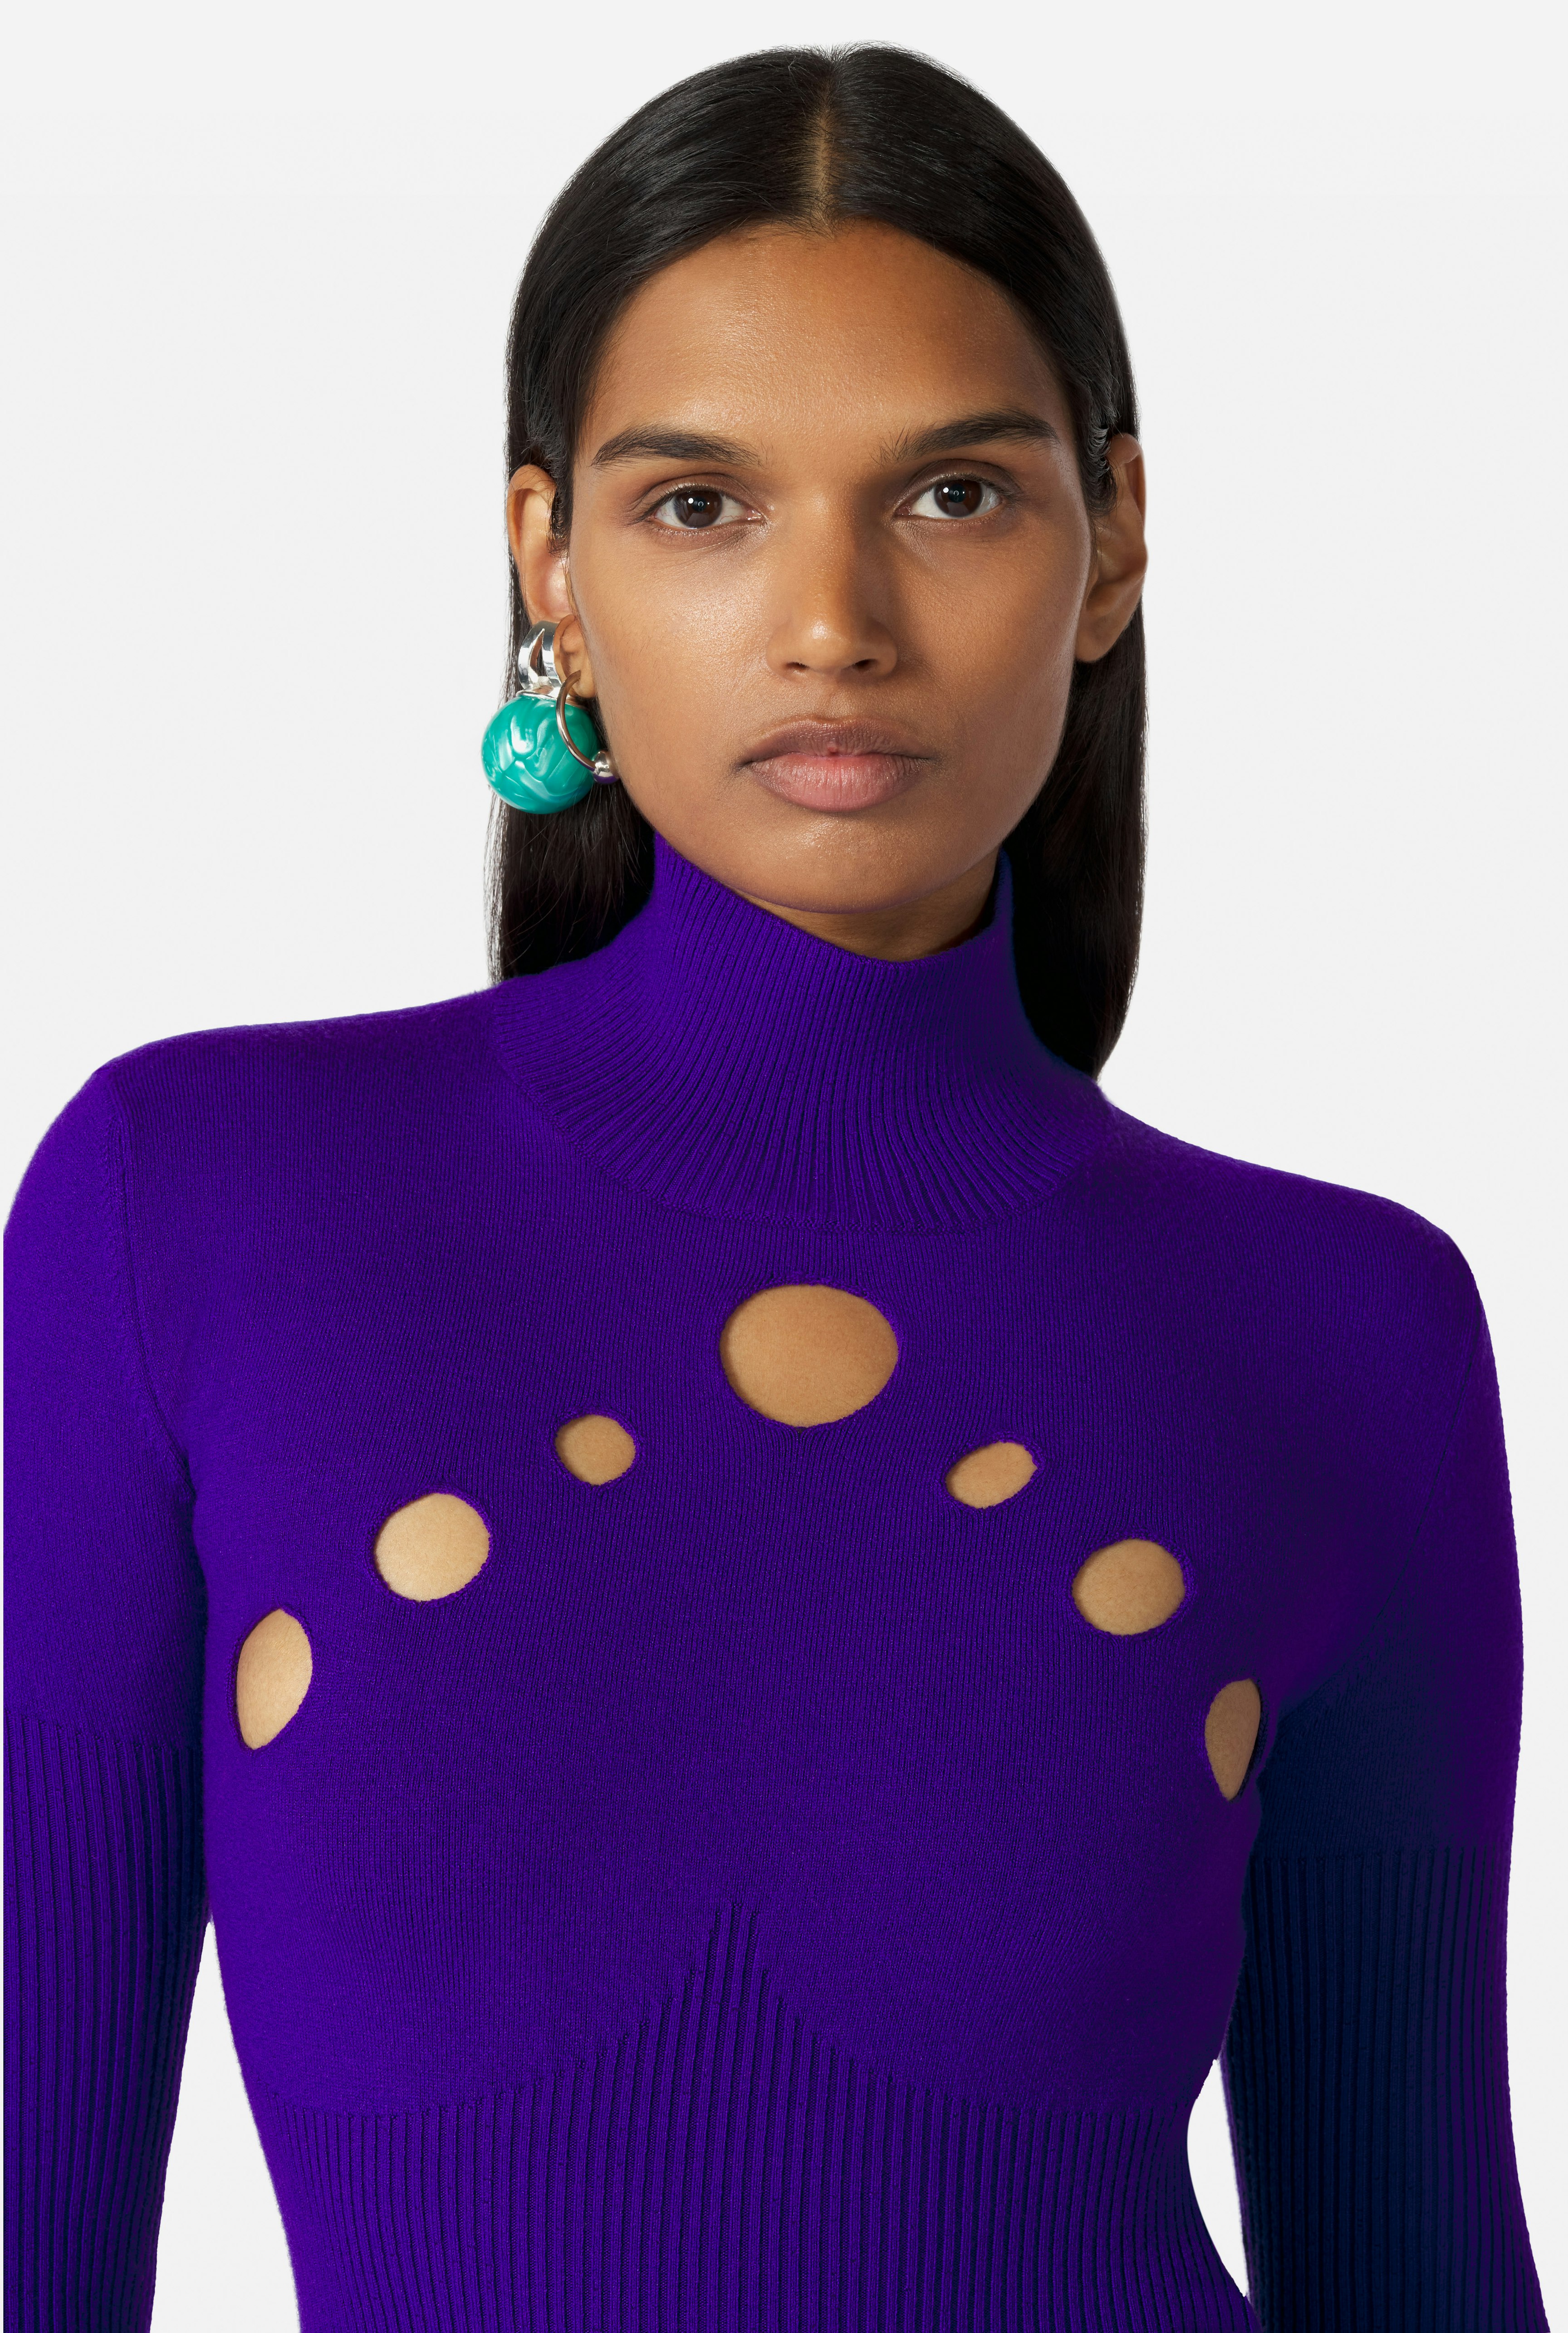 The Purple Openworked Knit Sweater